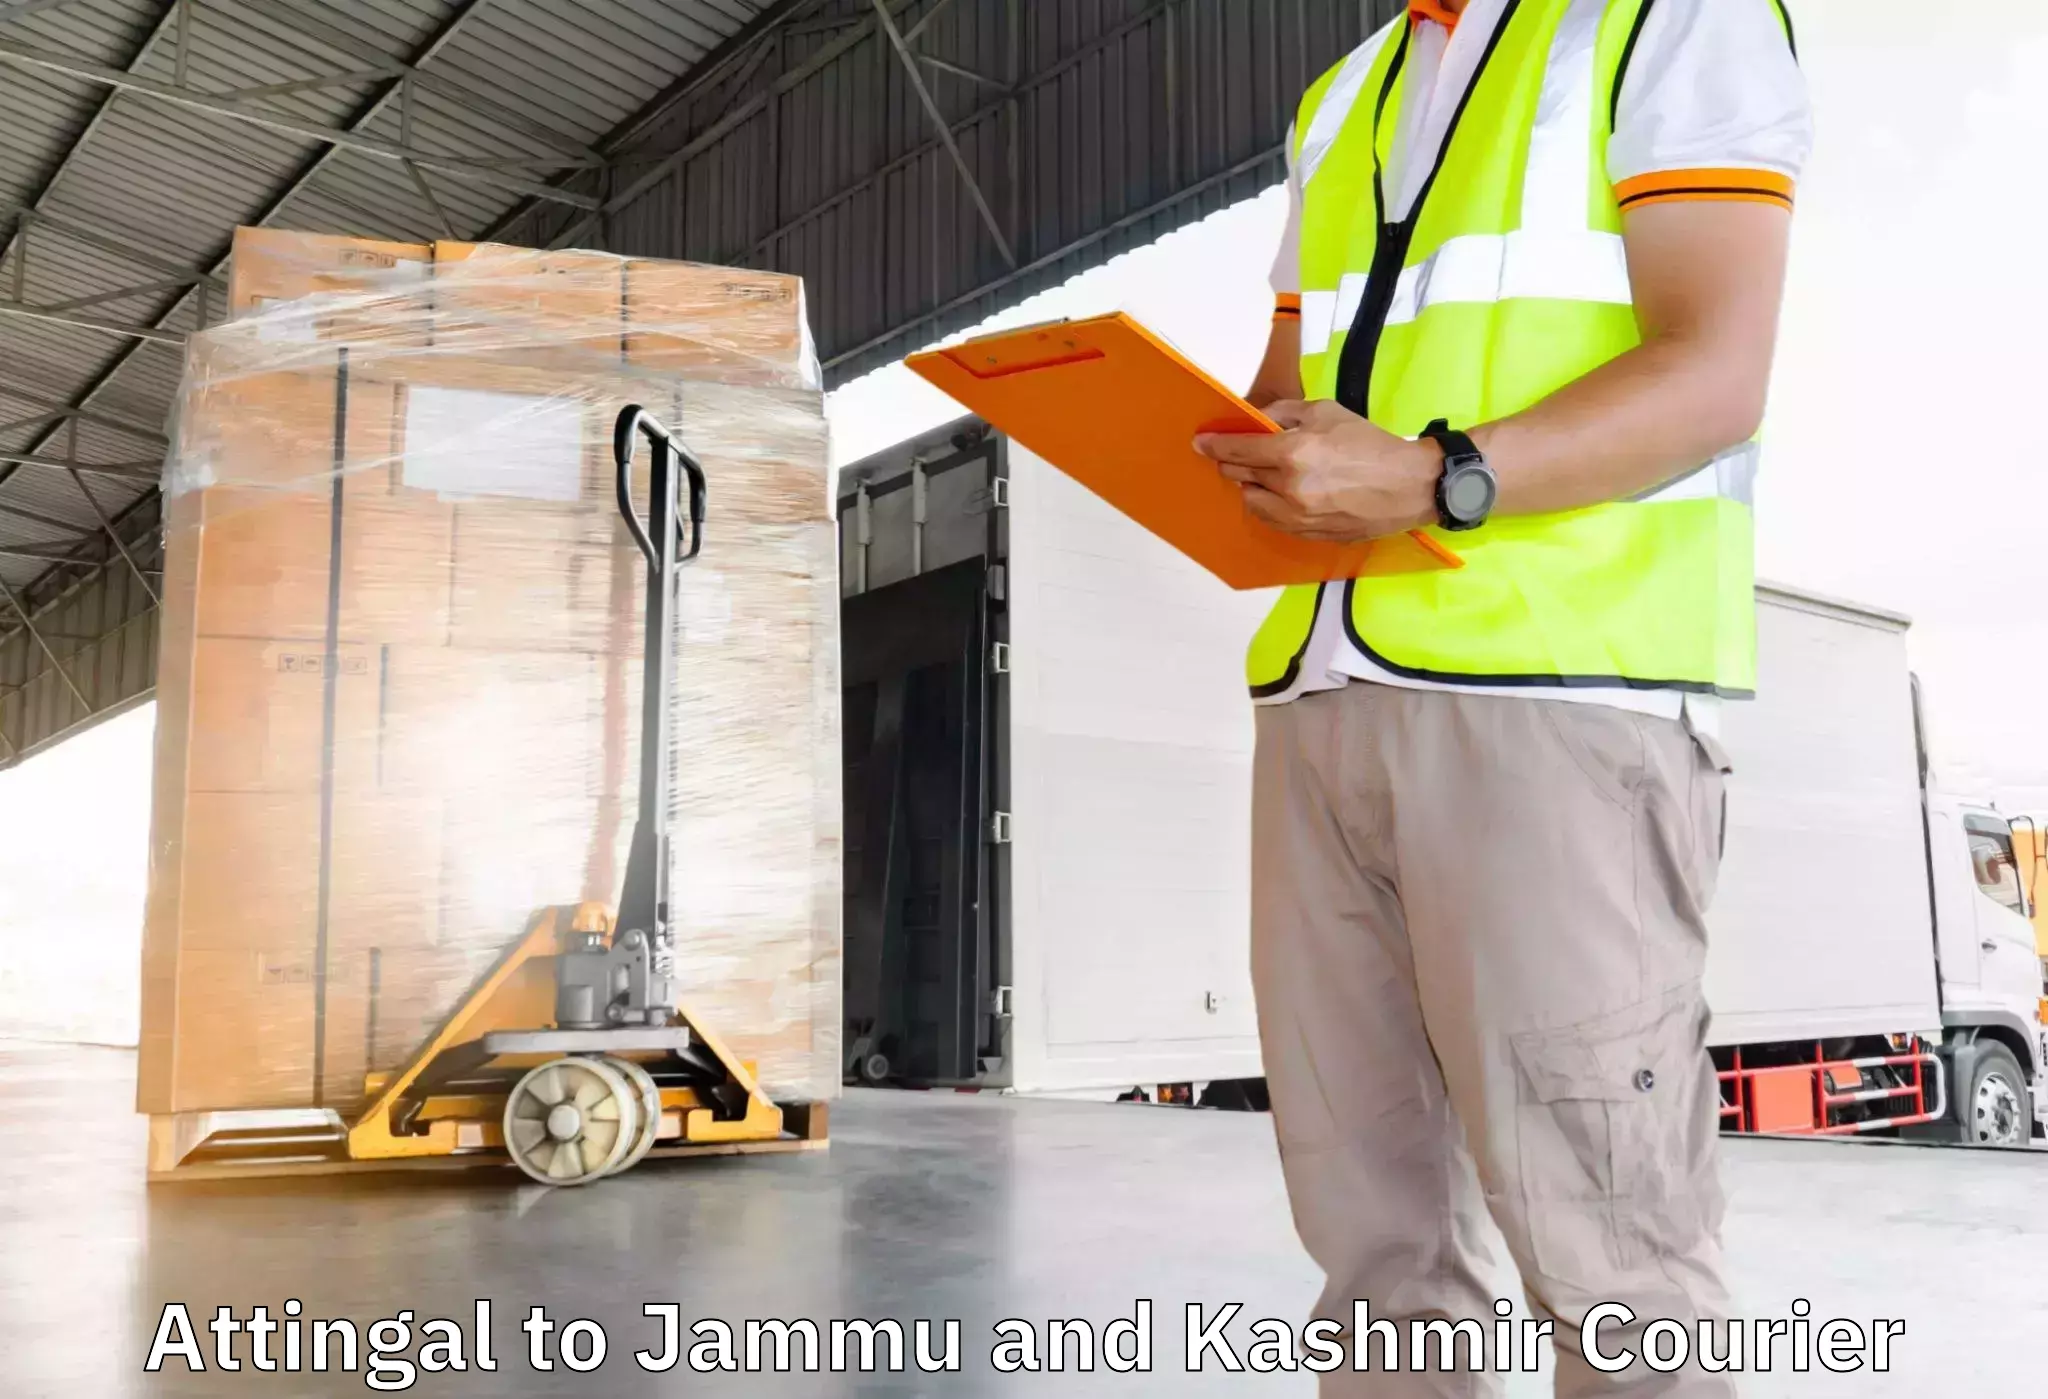 Furniture delivery service Attingal to University of Jammu